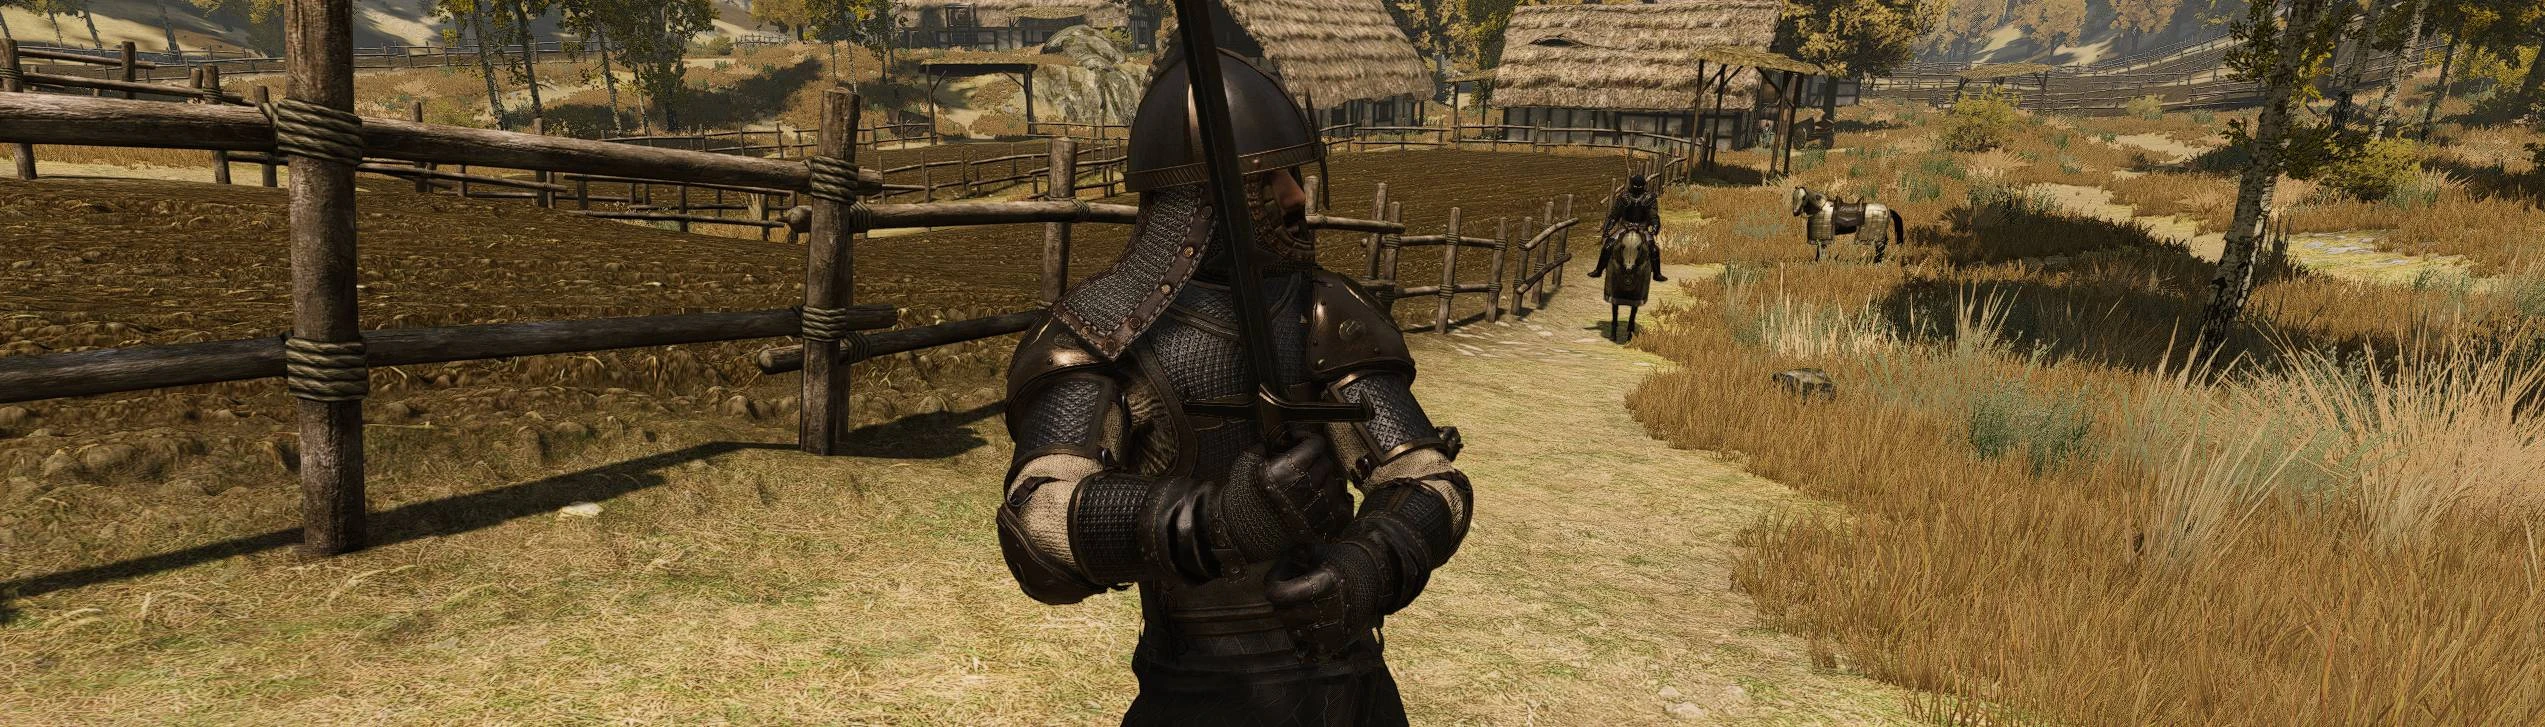 Game of Thrones mod for Mount & Blade 2 available for download